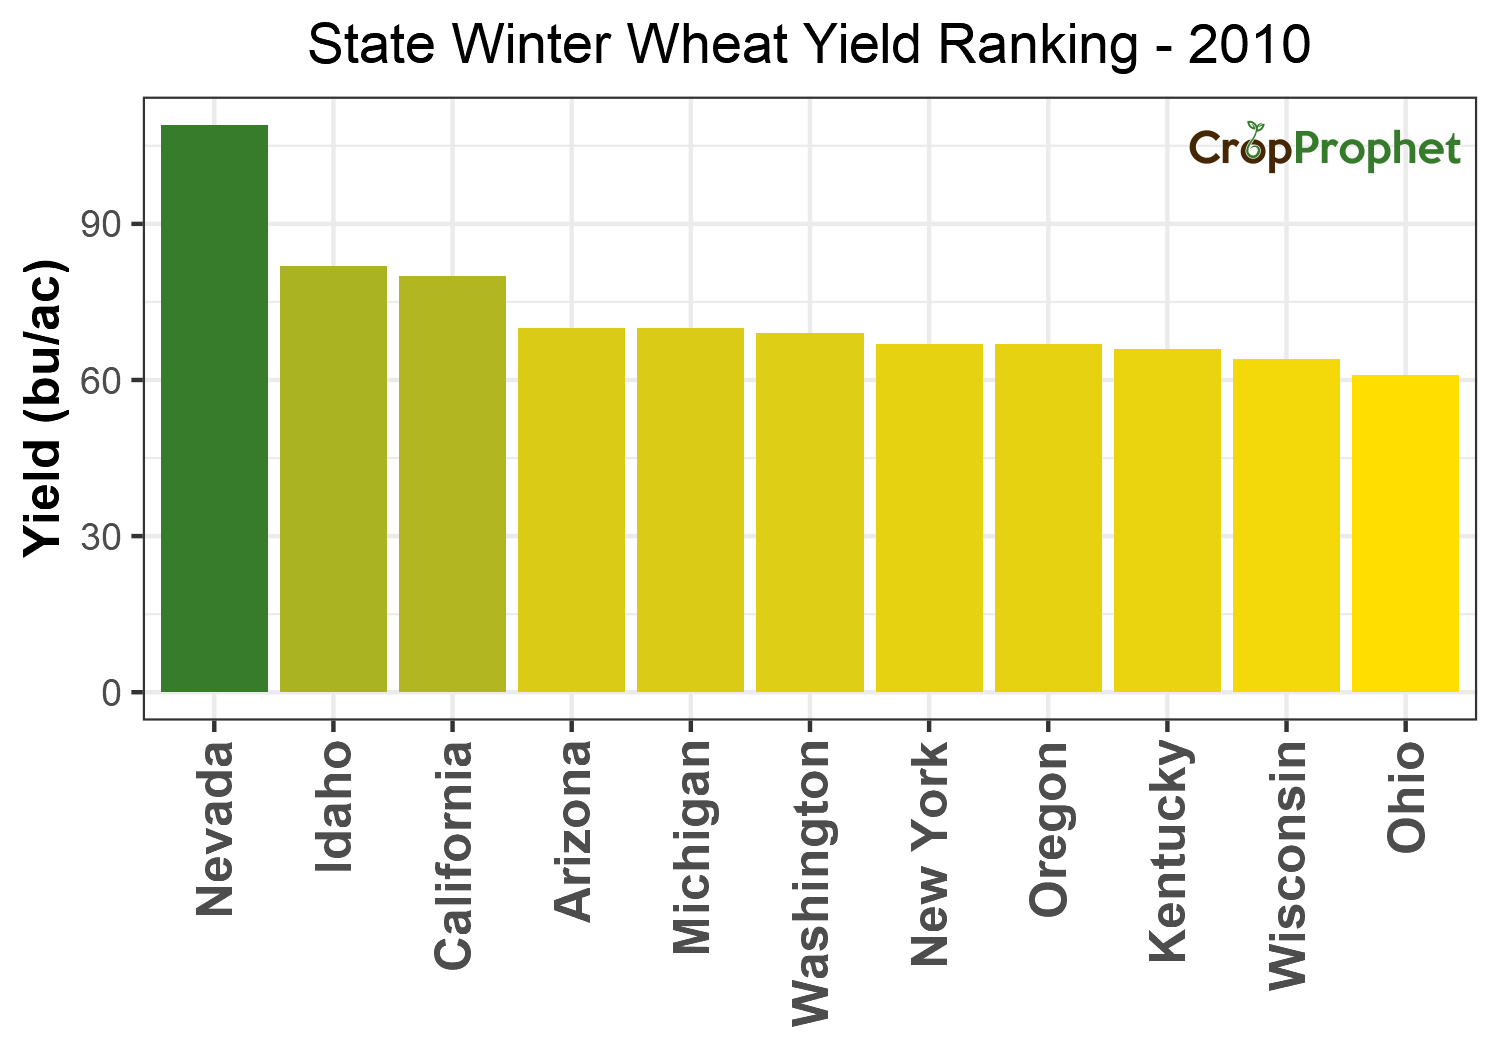 Winter wheat Production by State - 2010 Rankings